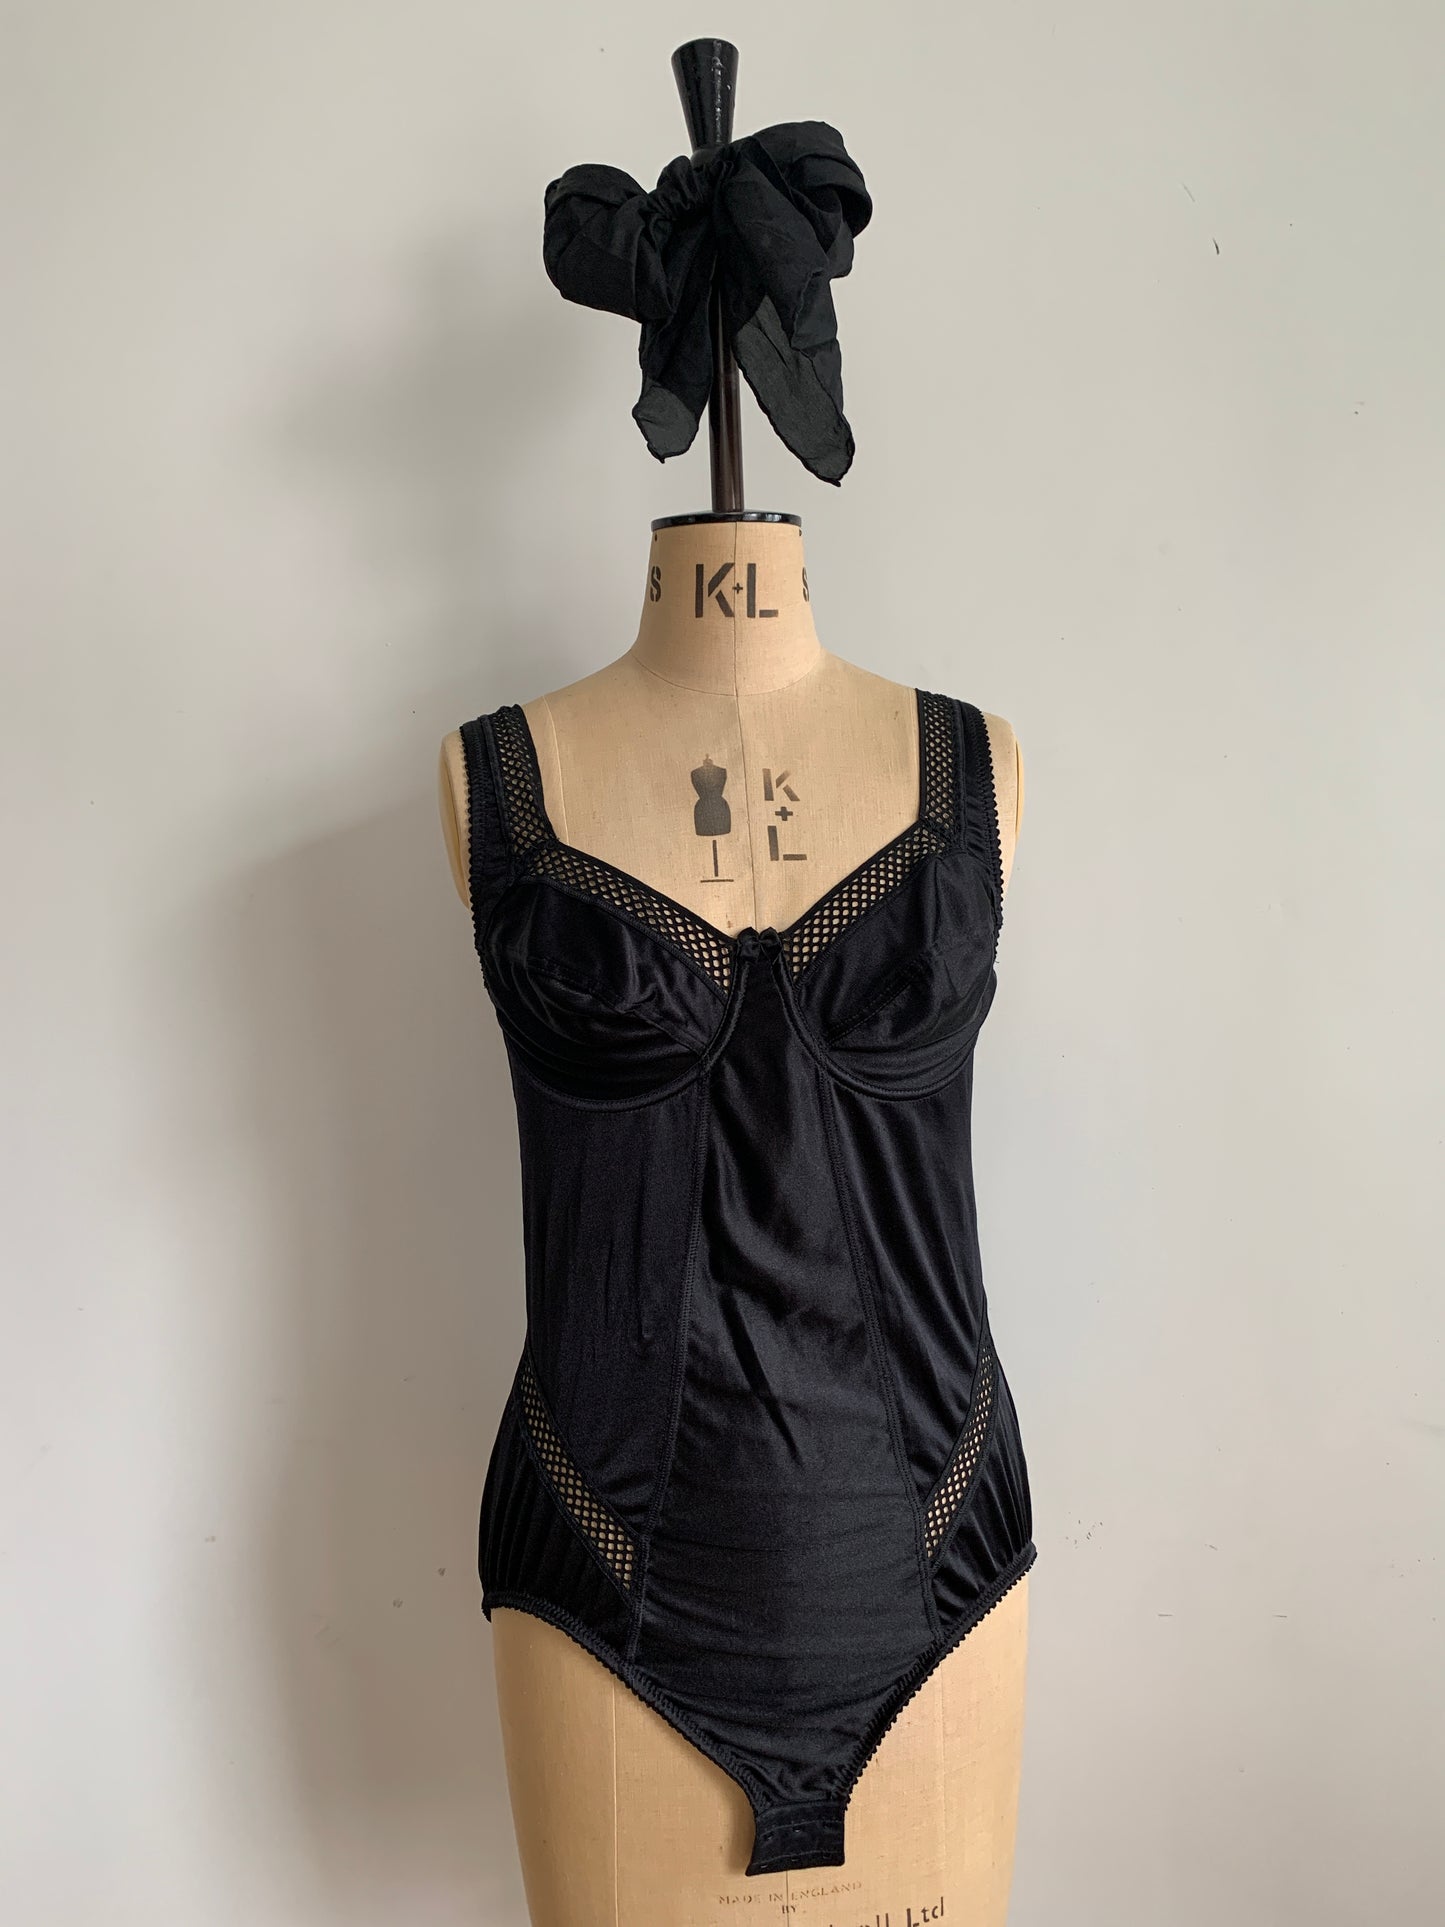 90’s Black Underwired Body Suit